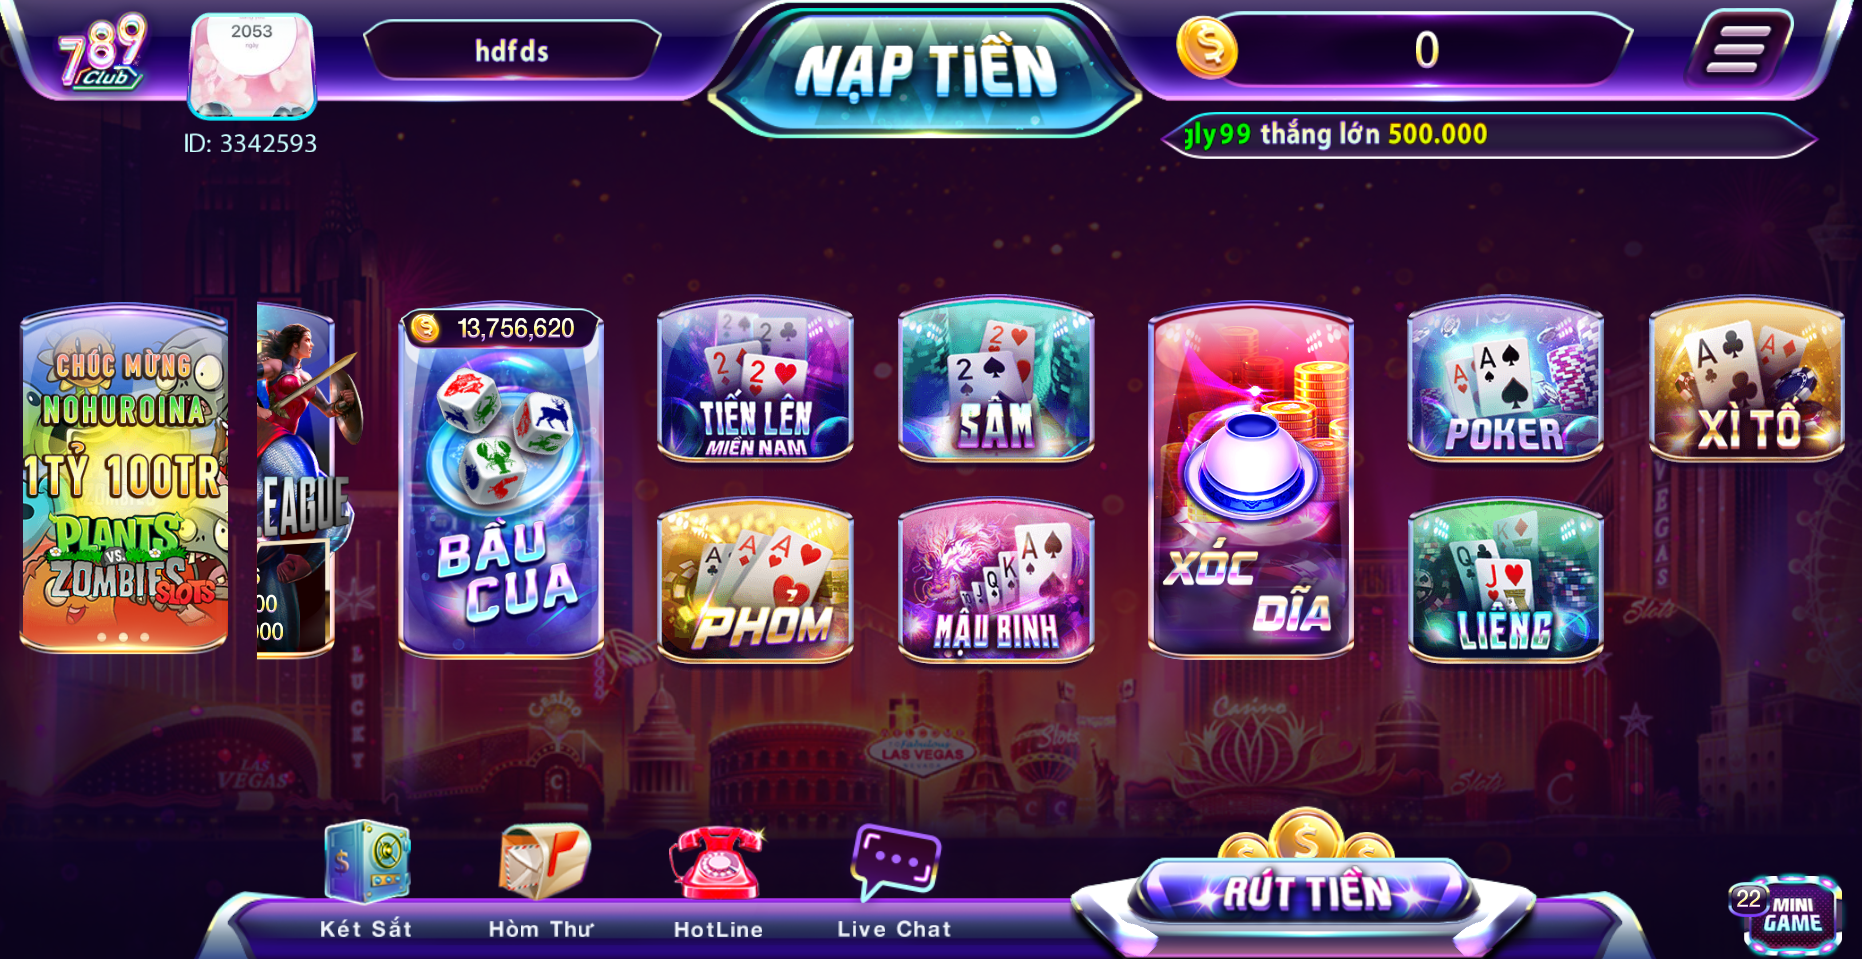 Giao diện game 789 club